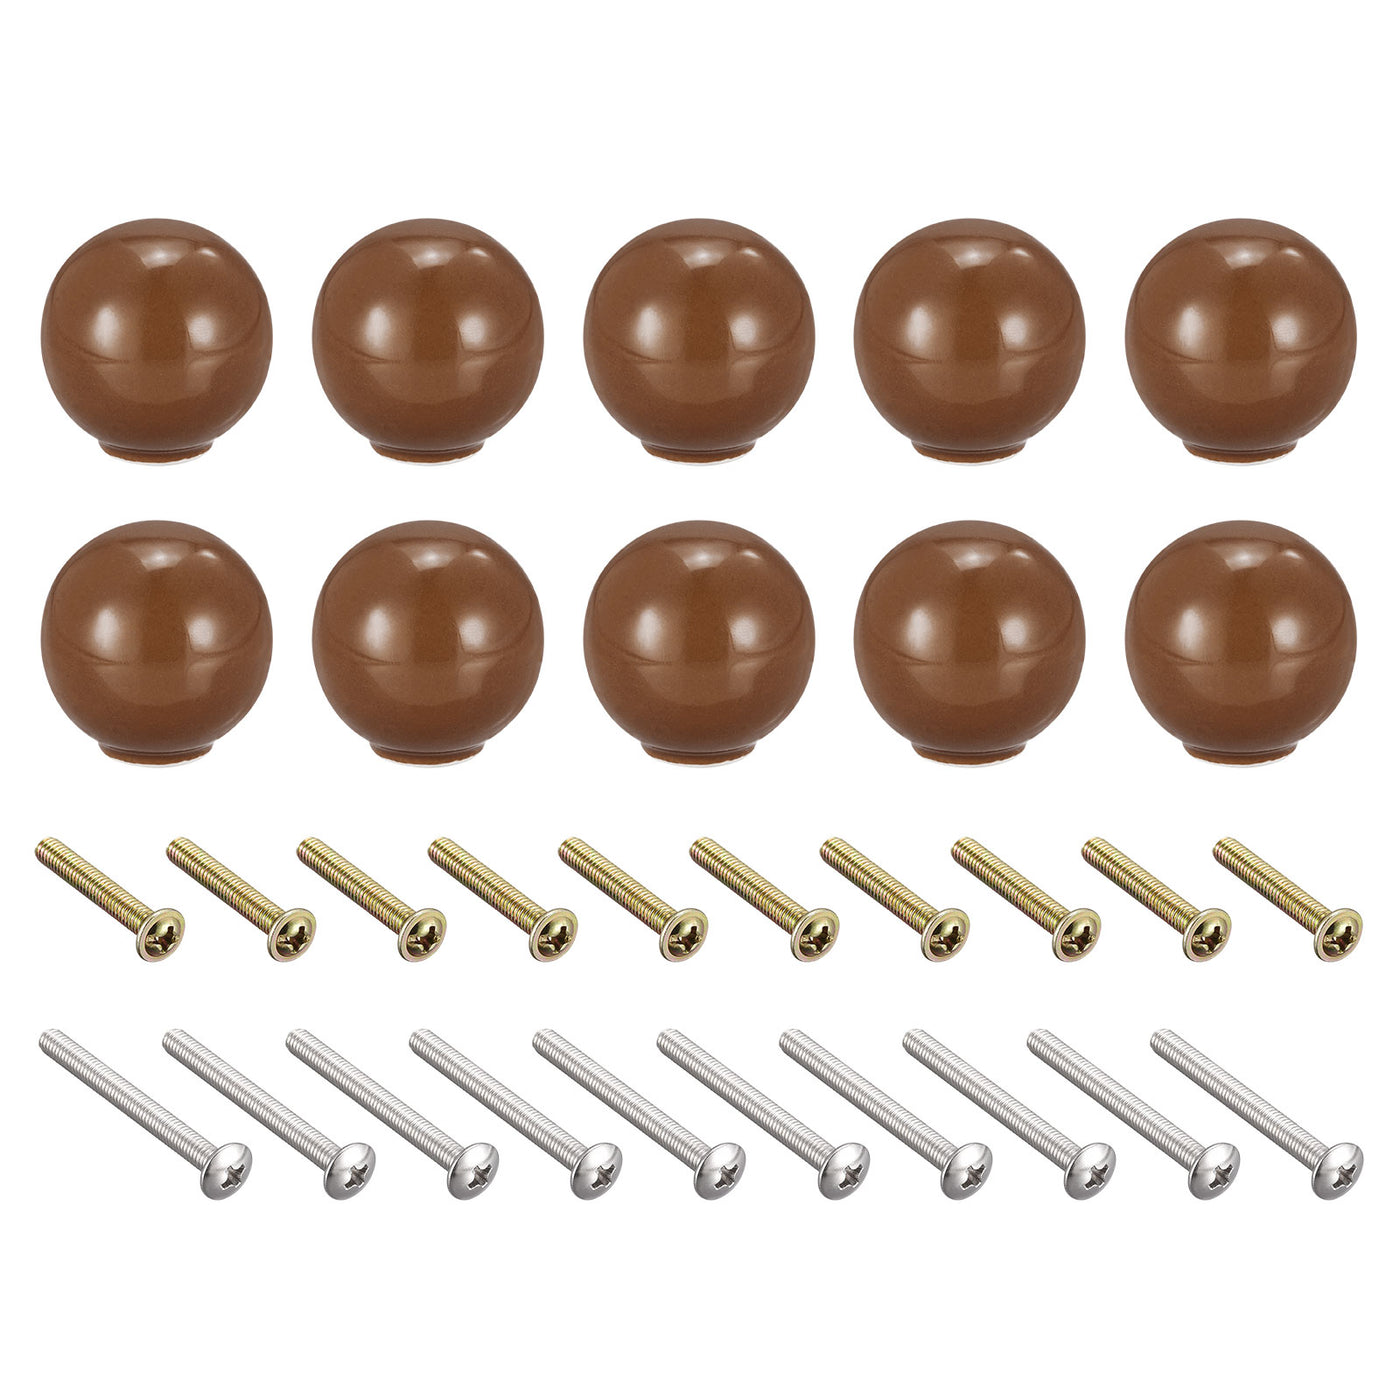 Uxcell Uxcell 33x35mm Ceramic Drawer Knobs, 10pcs Ball Shape Door Pull Handles Brown